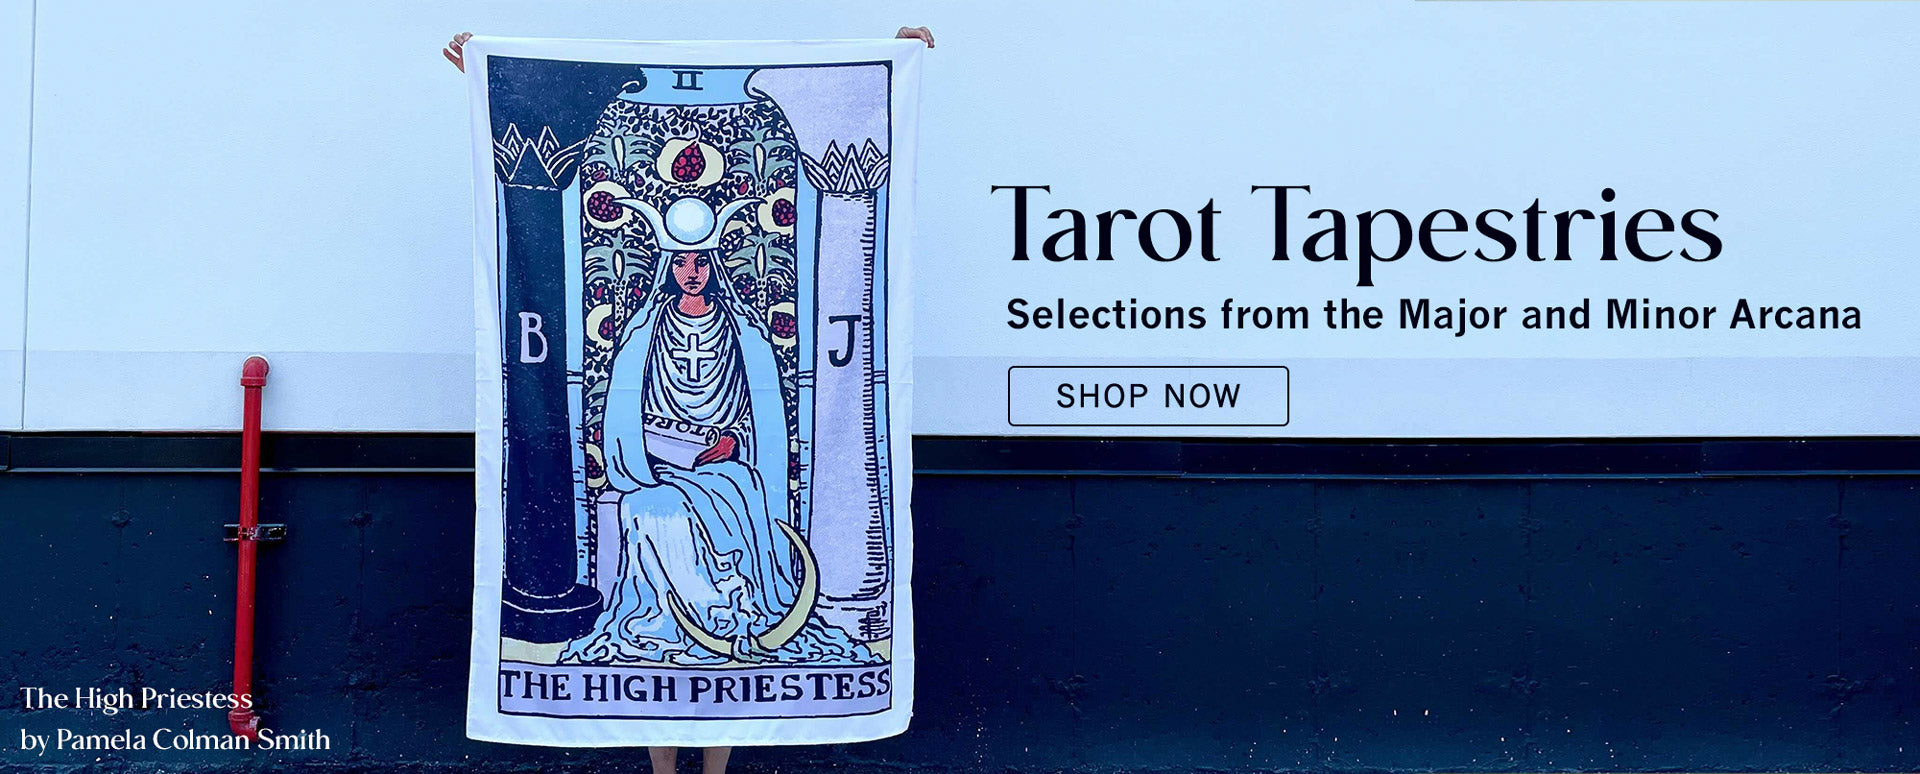 Tarot Tapestries. Selections from the Major and Minor Arcana from Rider Waite Smith Tarot Deck.